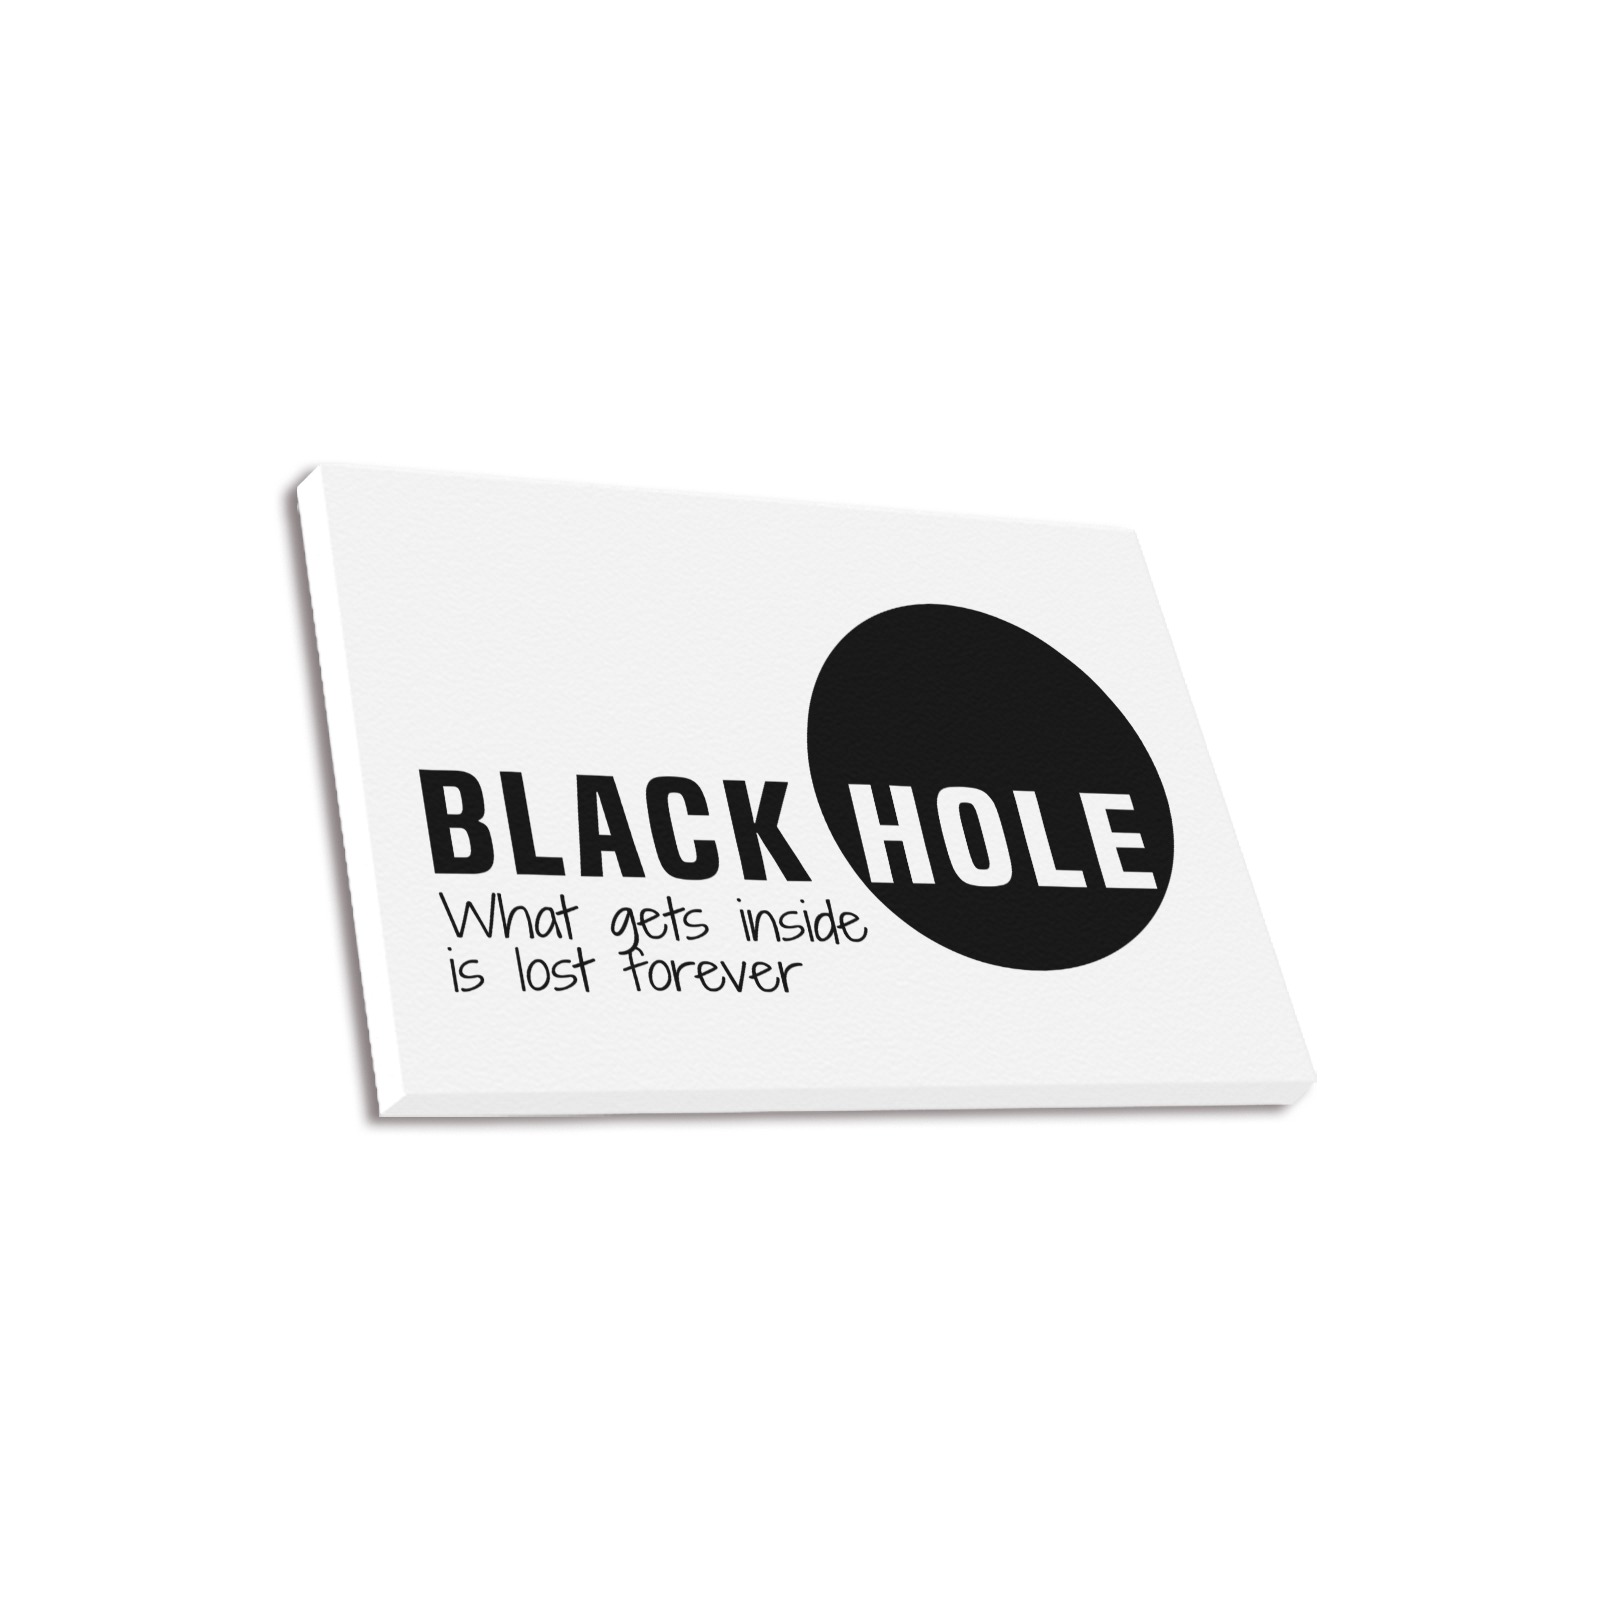 Black Hole What Gets Inside Is Lost Forever Black Upgraded Canvas Print 18"x12"